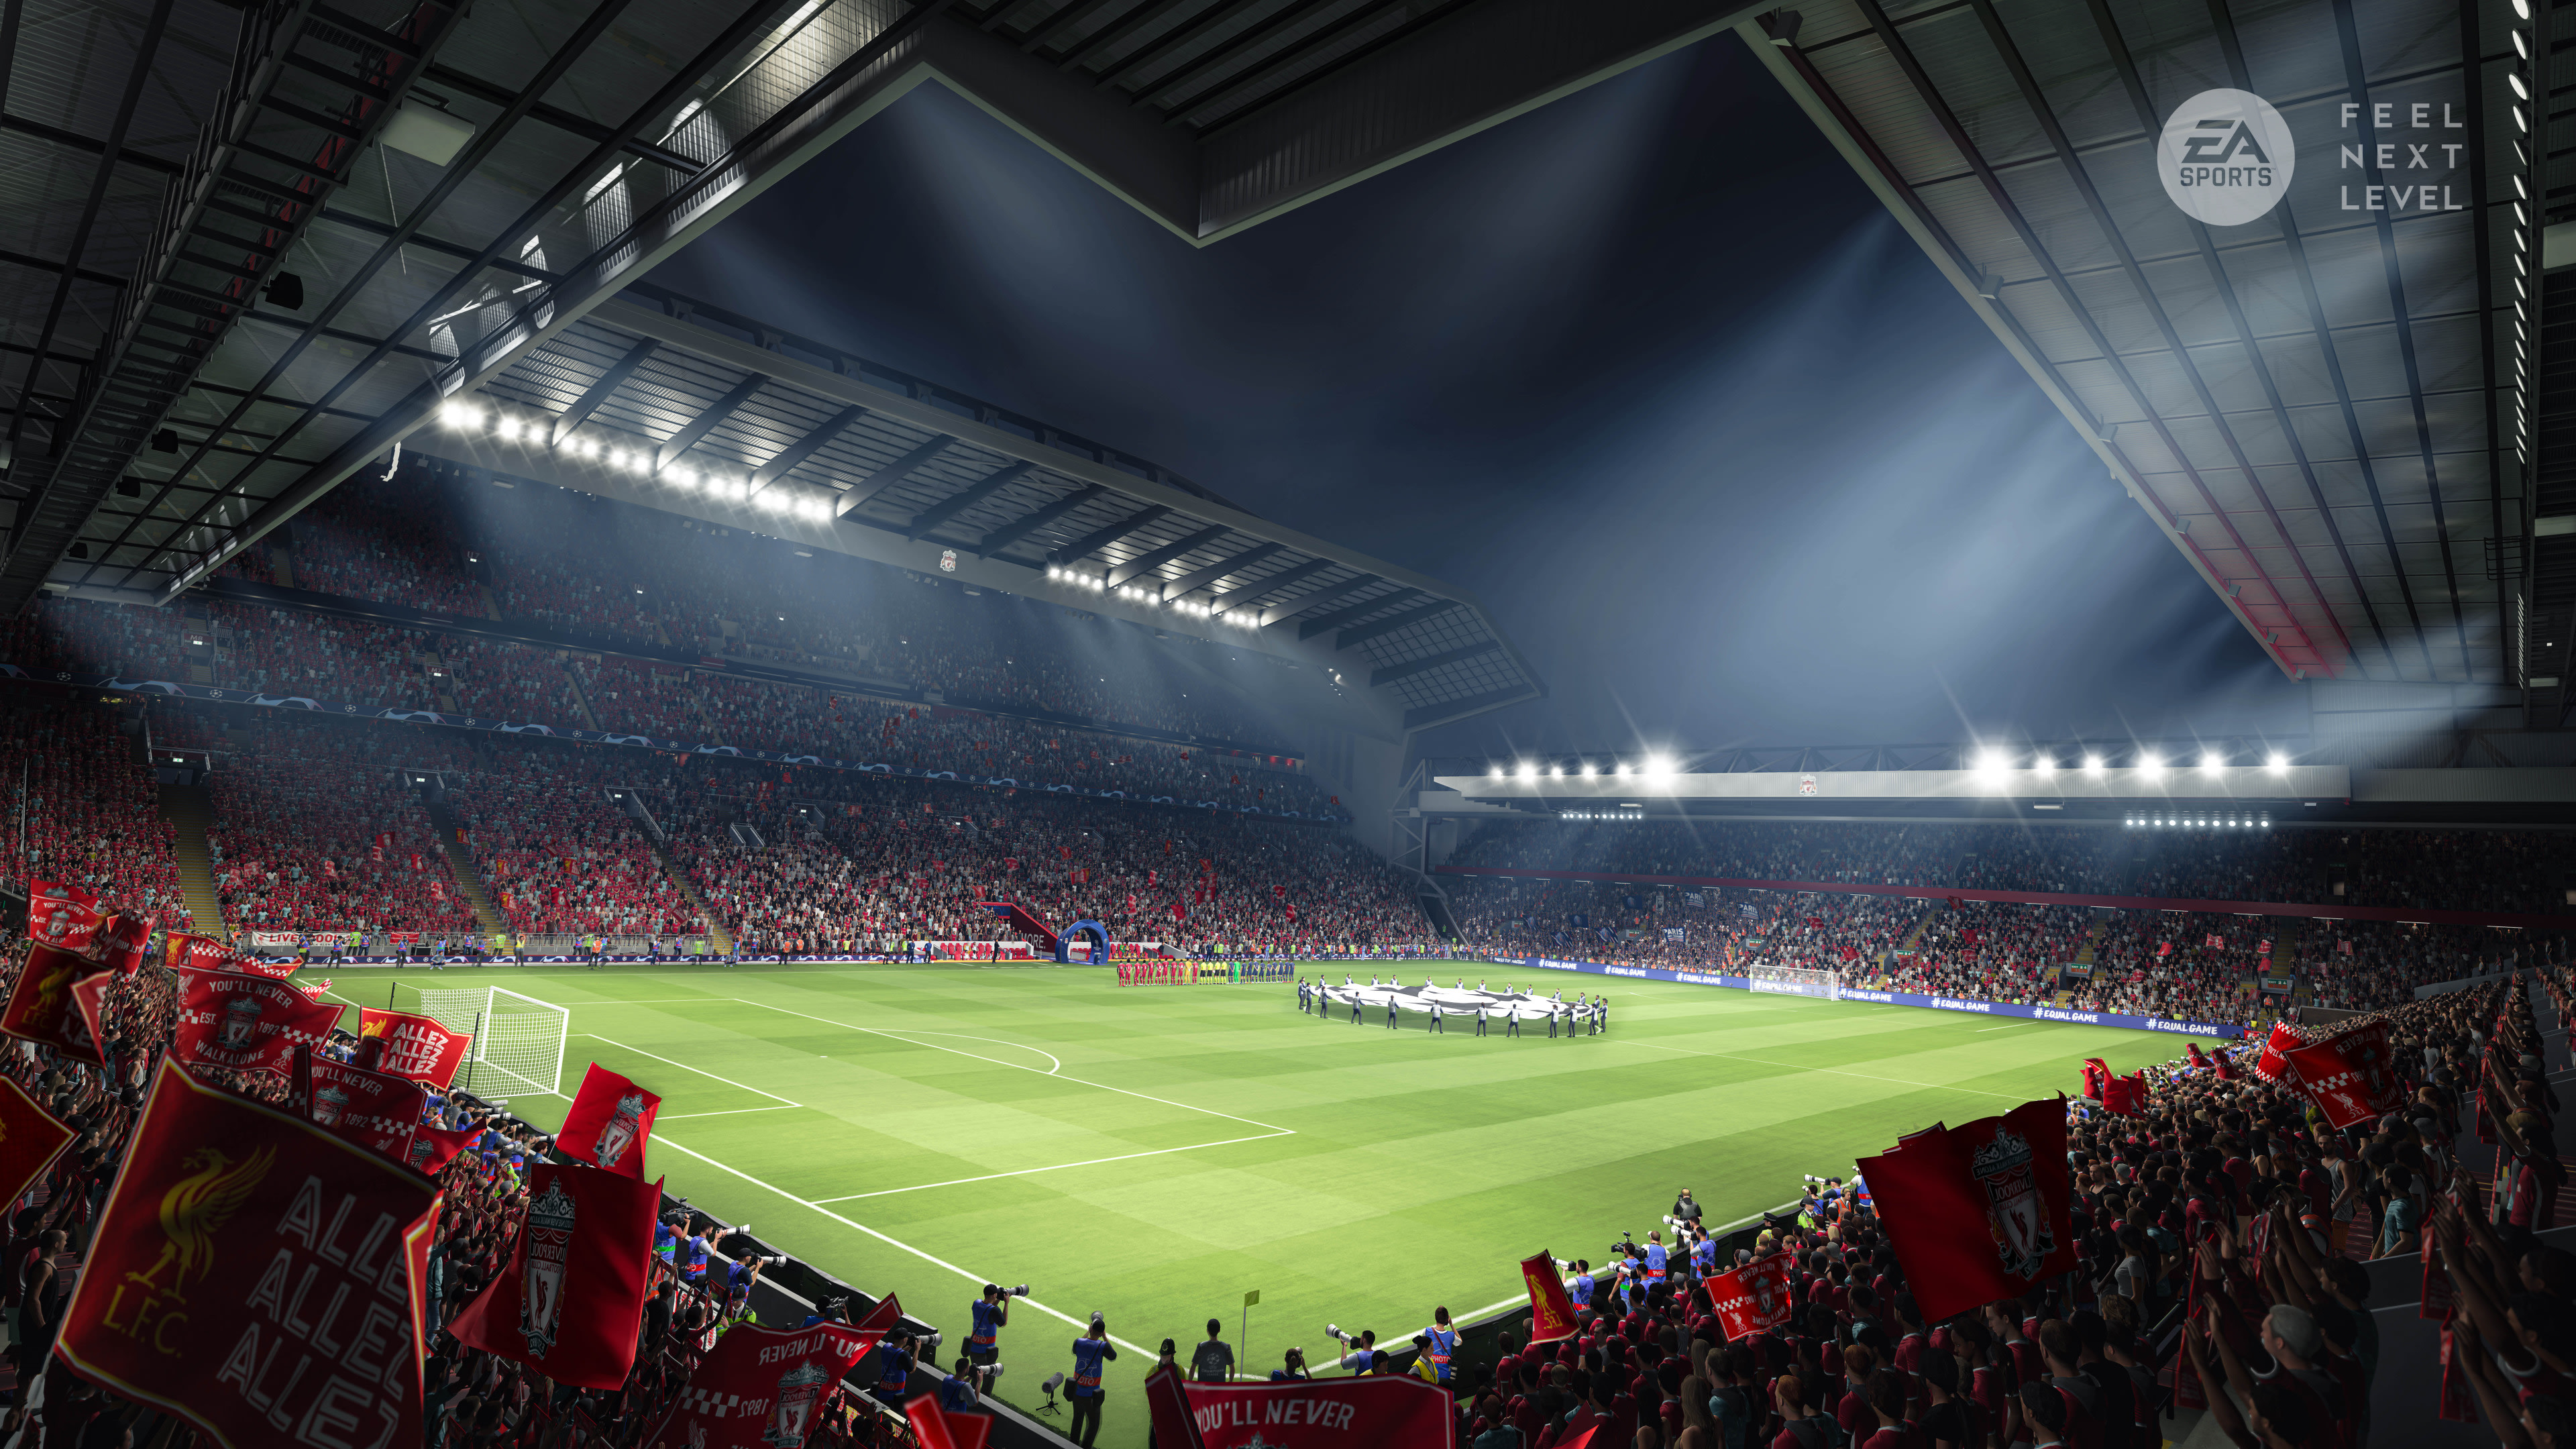 Fifa 21 wallpapers for desktop, download free Fifa 21 pictures and  backgrounds for PC 